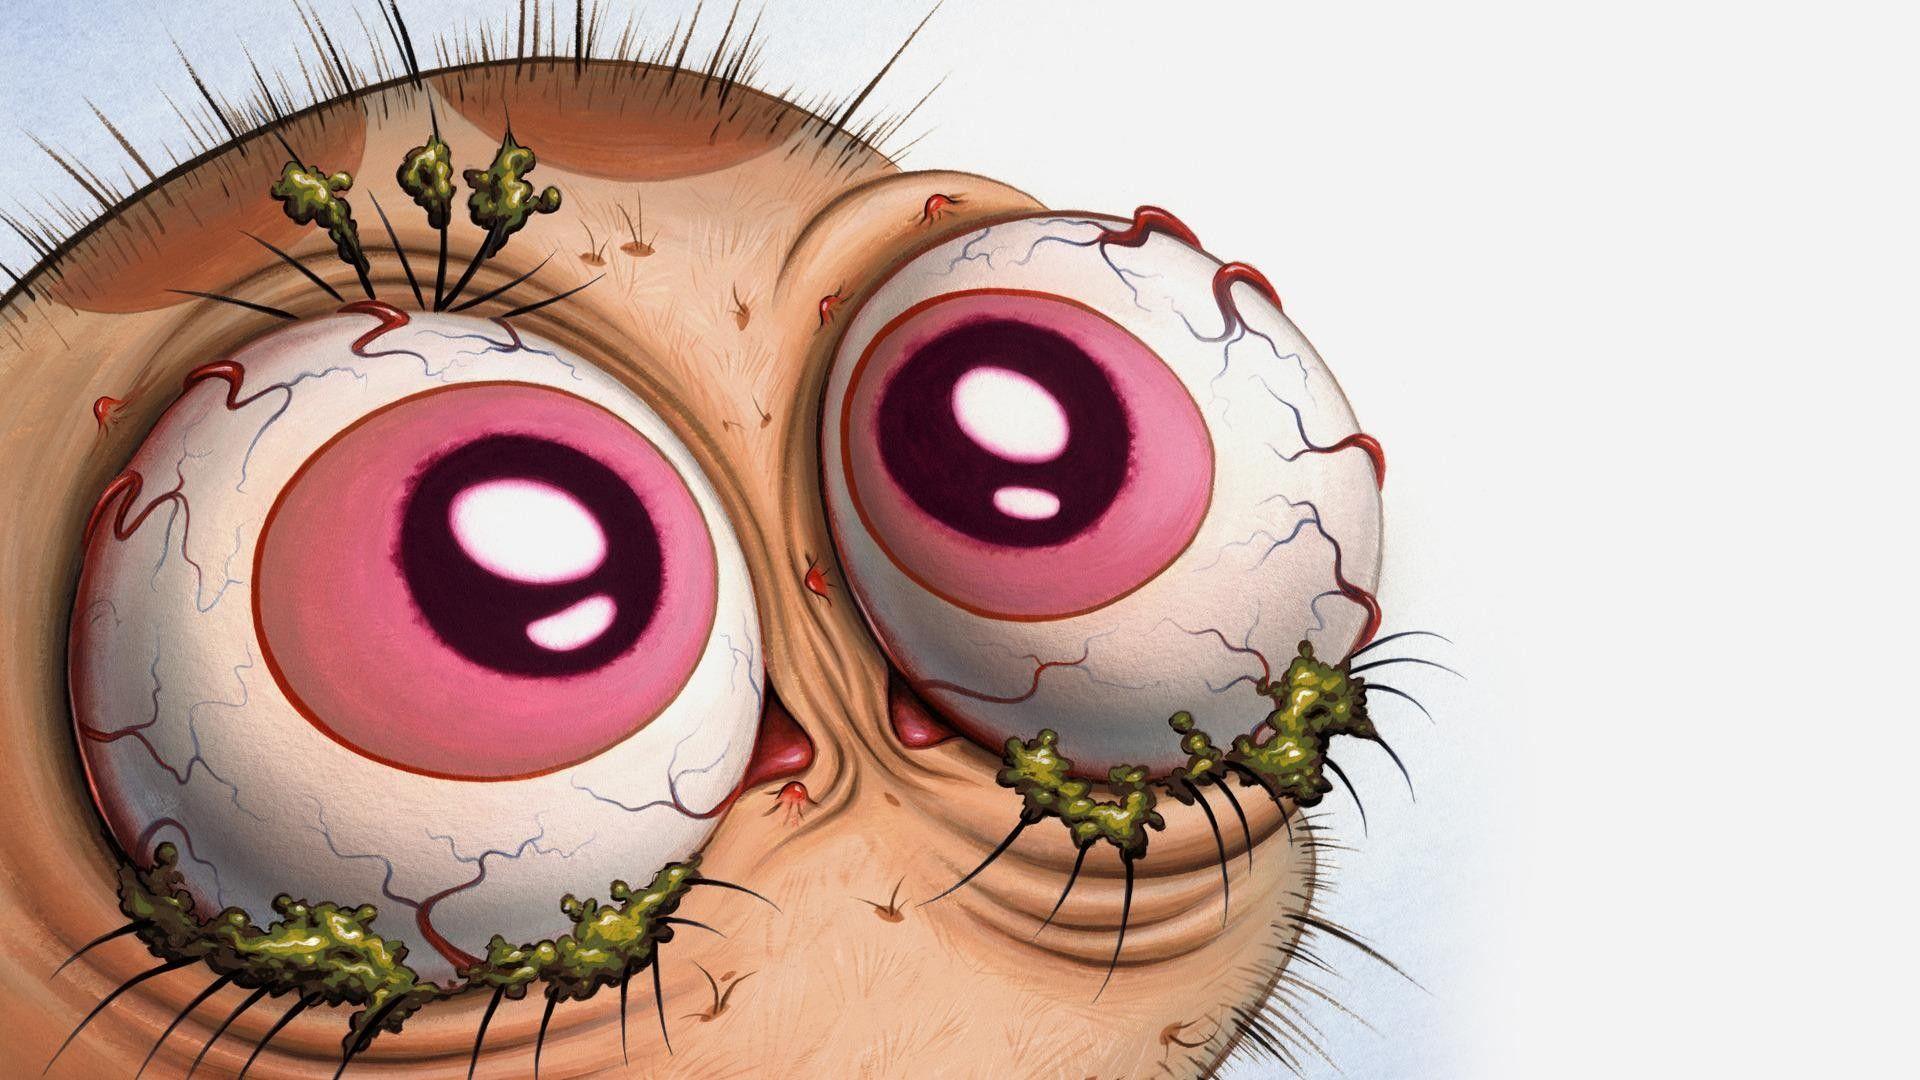 Ren and Stimpy Eyes Gross free desktop background and wallpaper